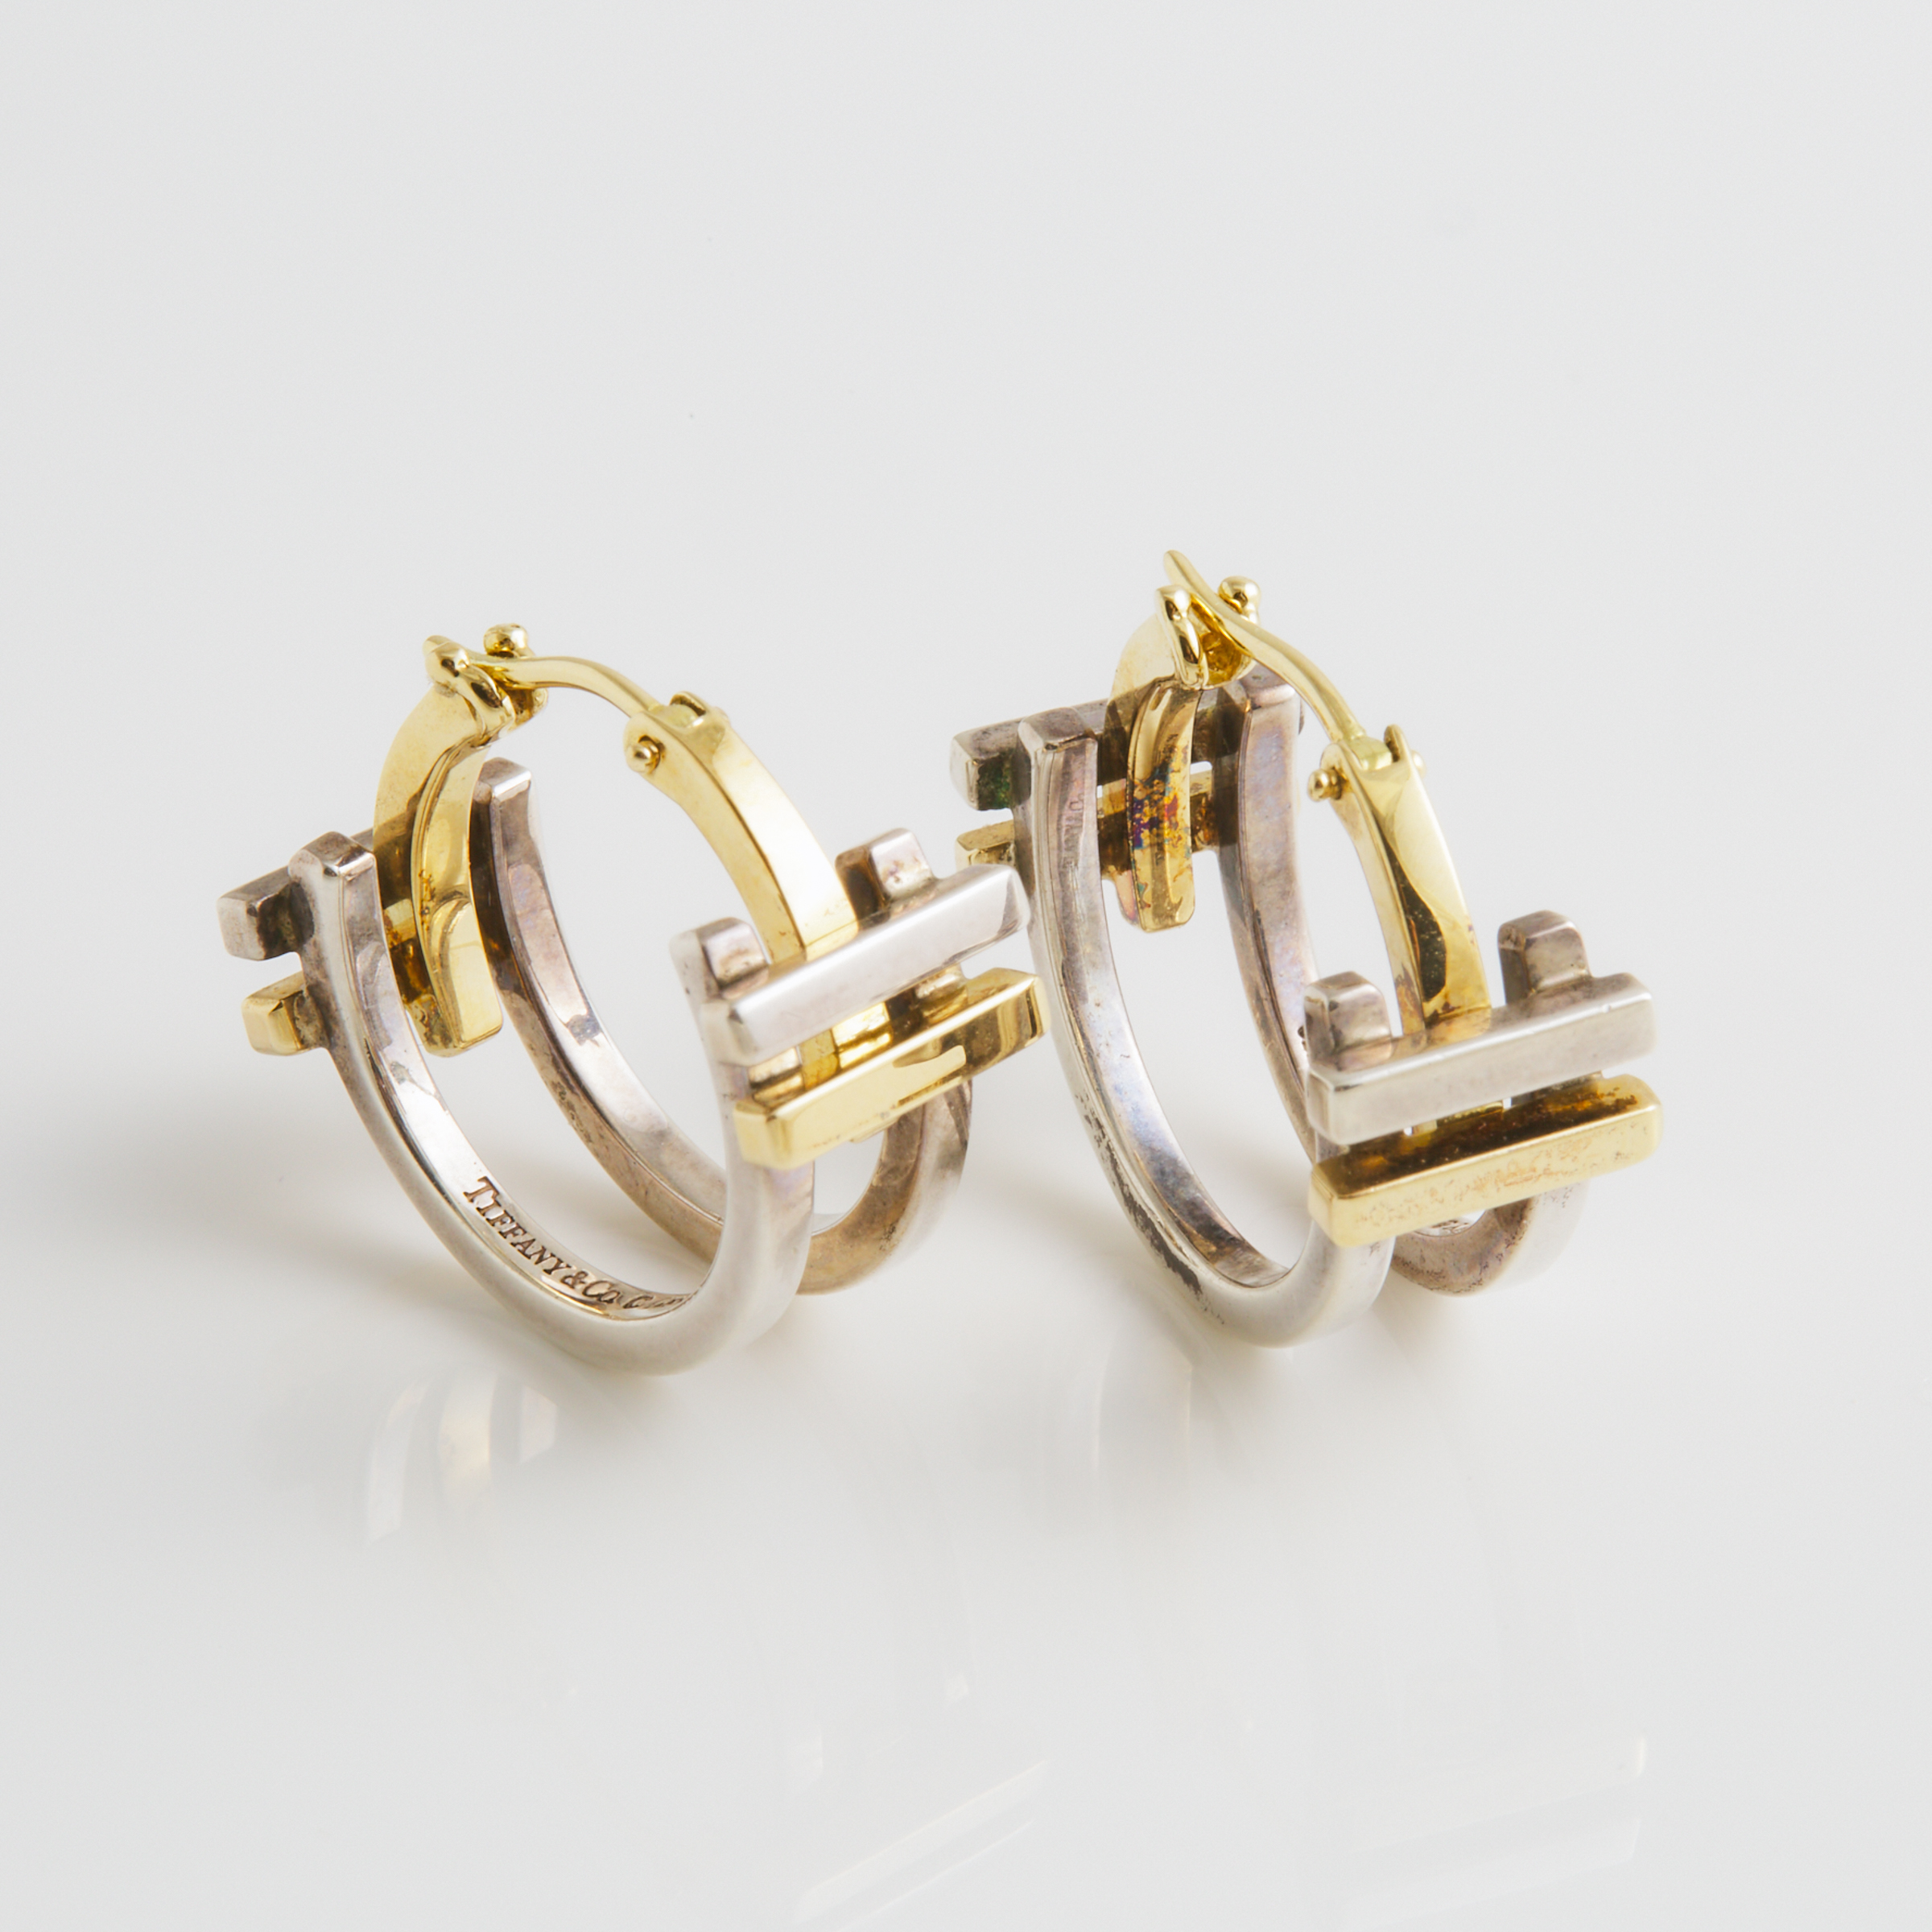 Pair Of Tiffany & Co. Frank Gehry "Axis" 18k Yellow Gold And Sterling Silver Hoop Earrings